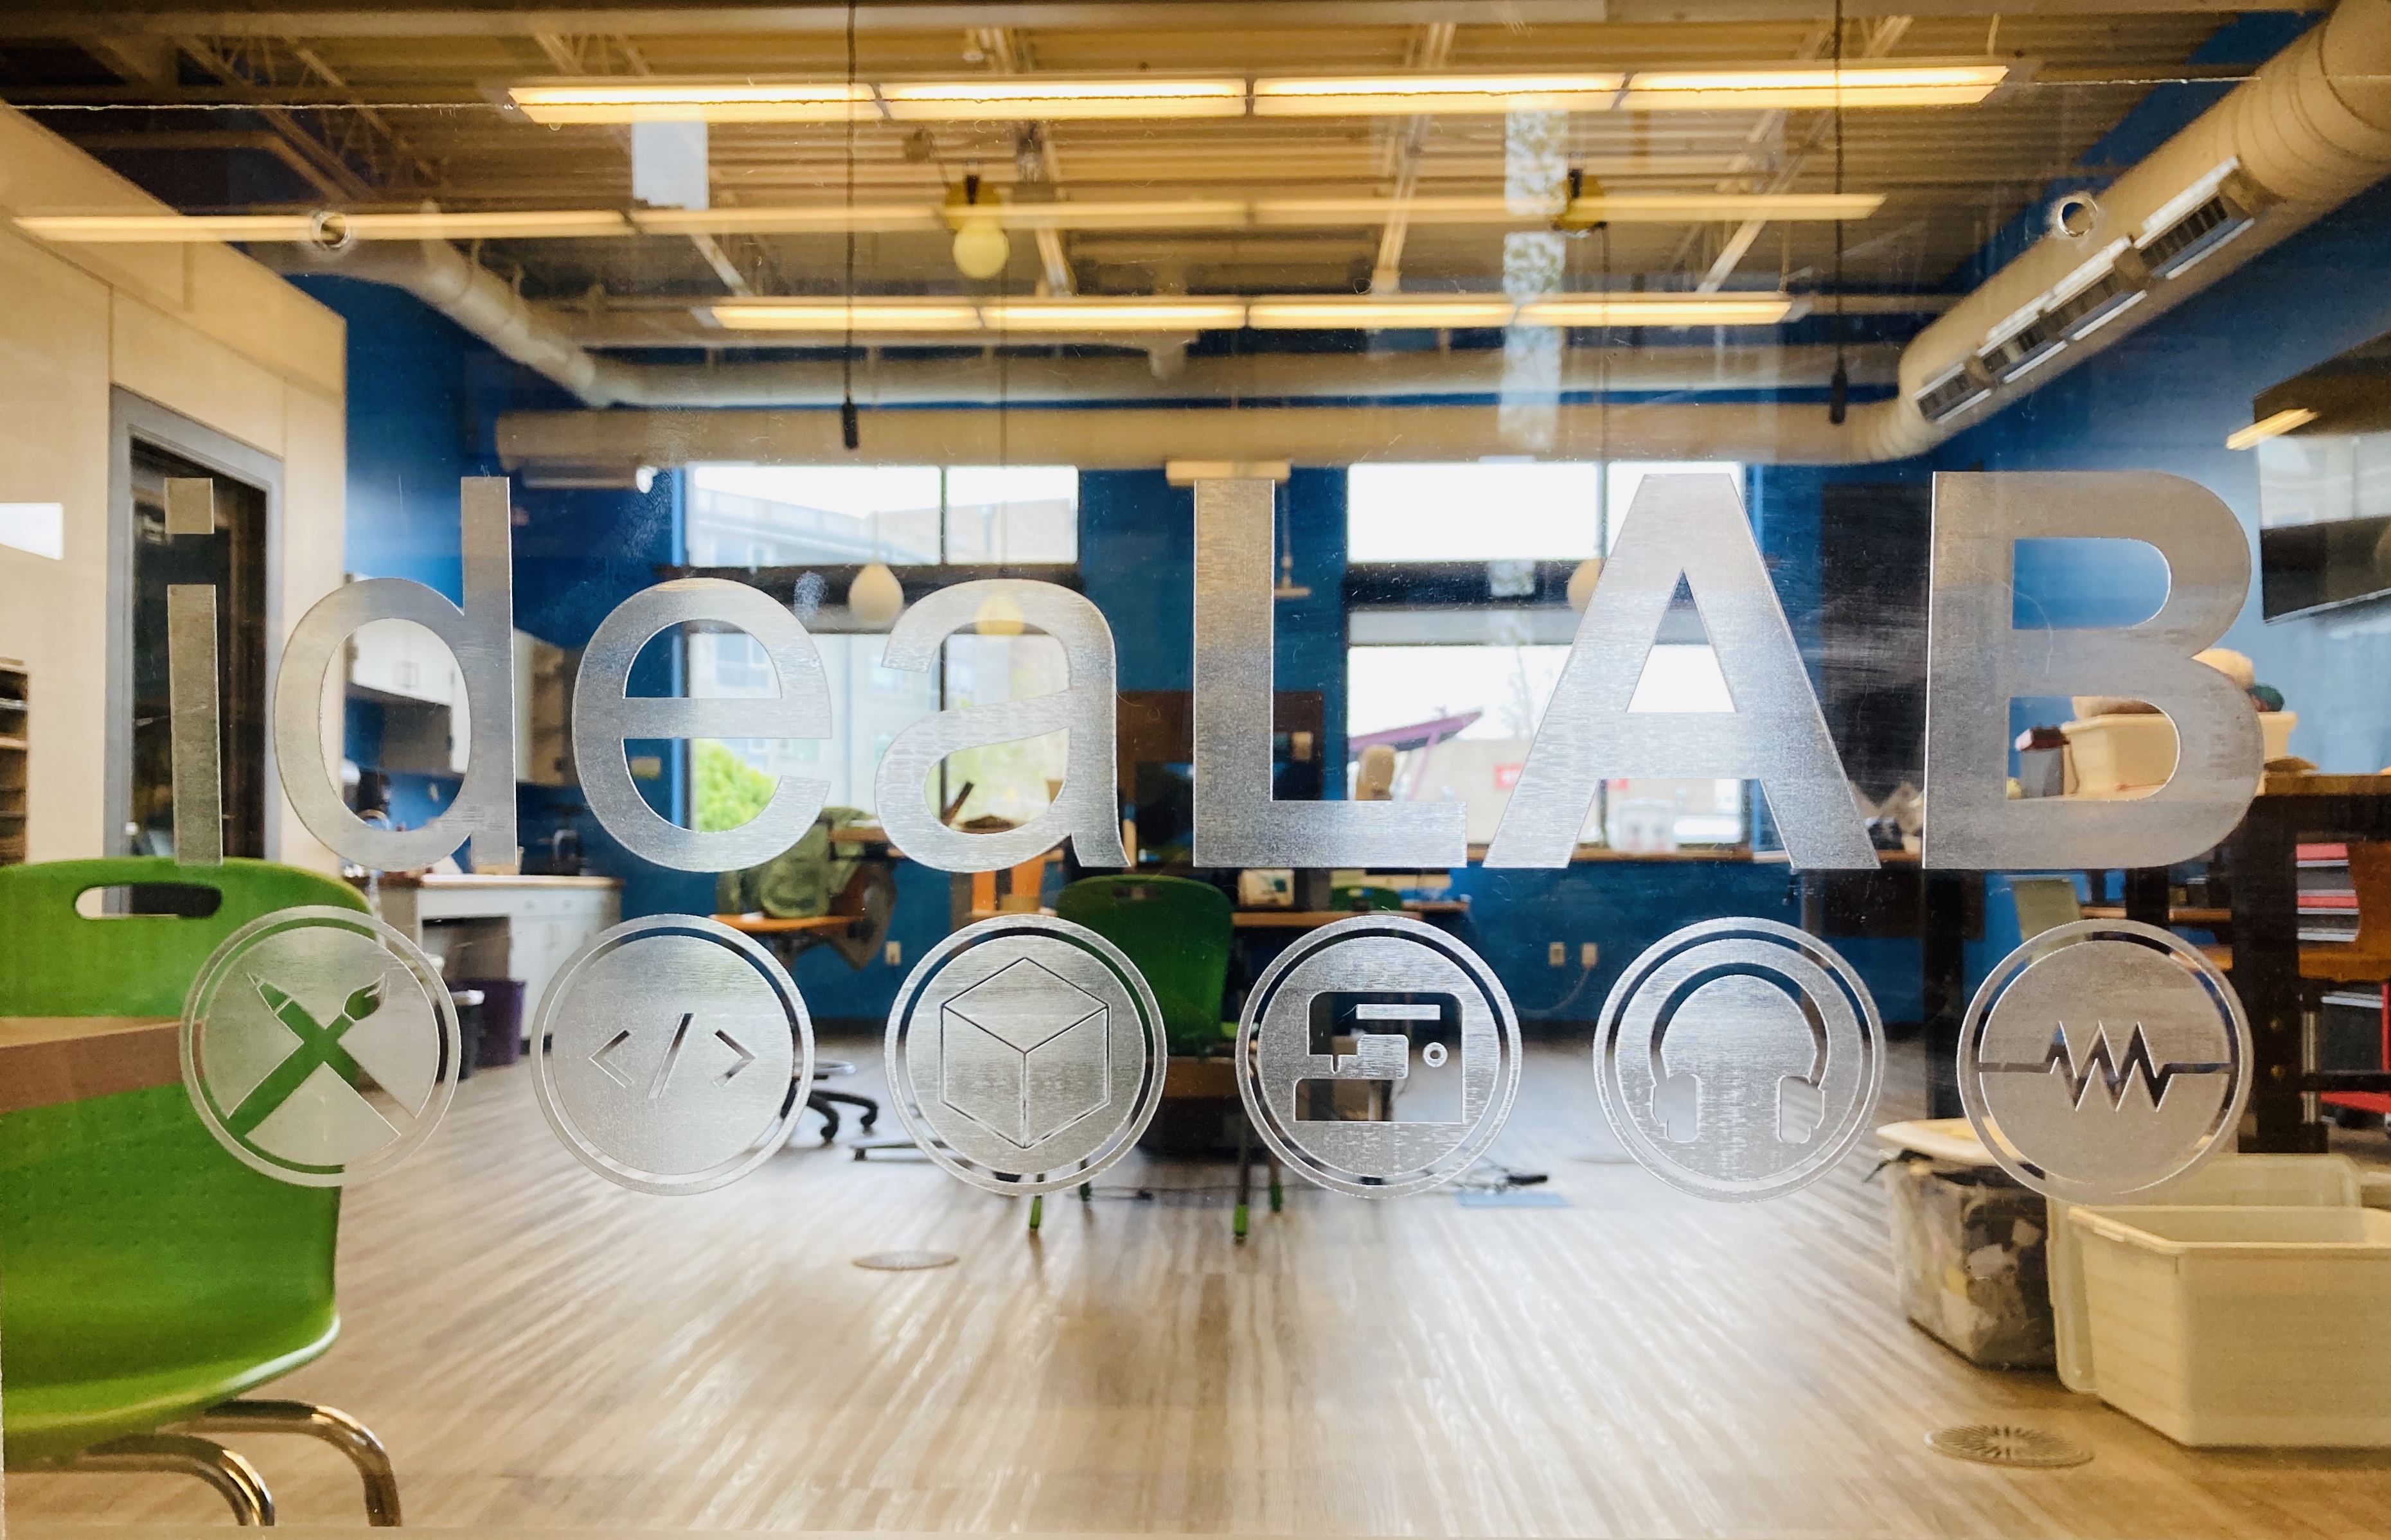 Close up of the word "ideaLAB" etched on to transparent acrylic. Through it, one can see the tables, chairs, and computers inside the Sam Gary Branch ideaLAB.